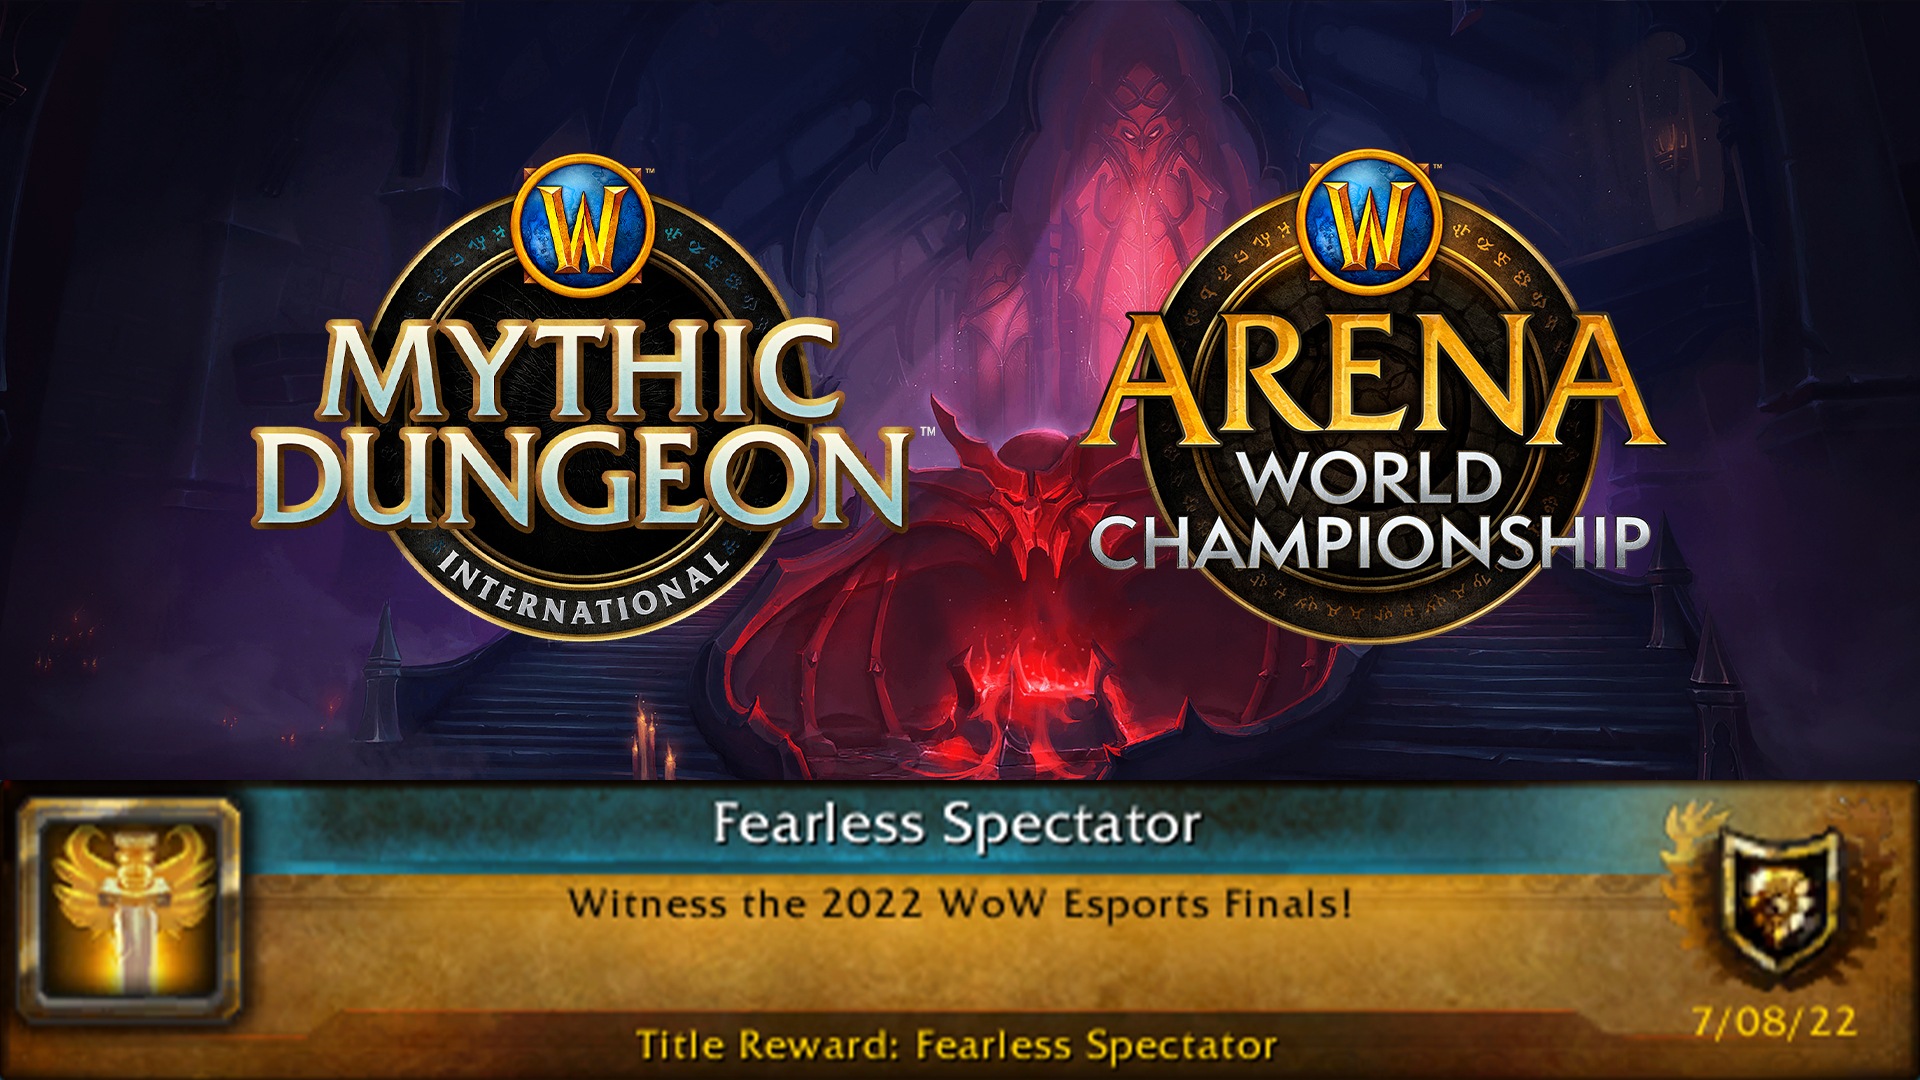 Watch the MDI & AWC Shadowlands Global Finals and earn the Fearless Spectator title!